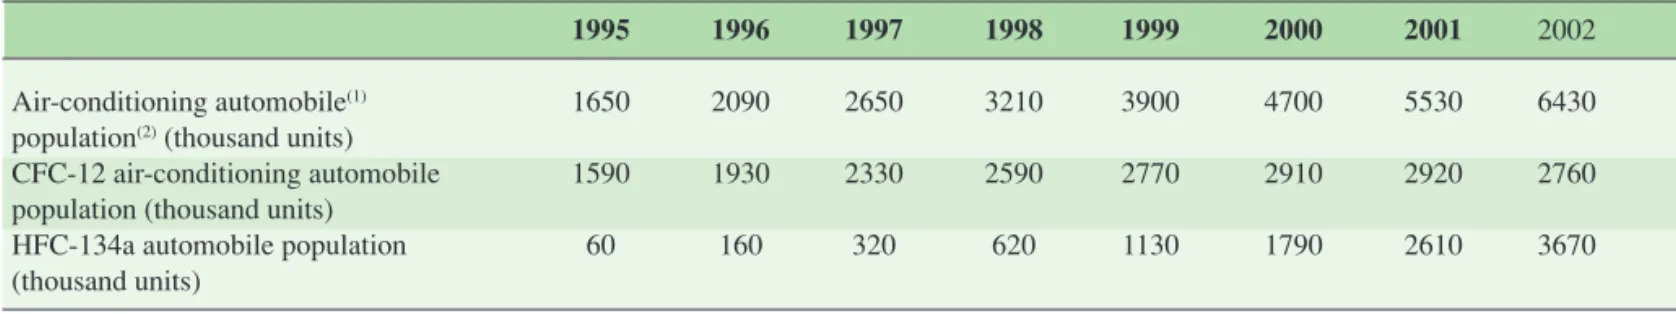 Table 6.7. Evolution of air-conditioned vehicle ﬂeets in China (Hu, Li and Yi, 2004).